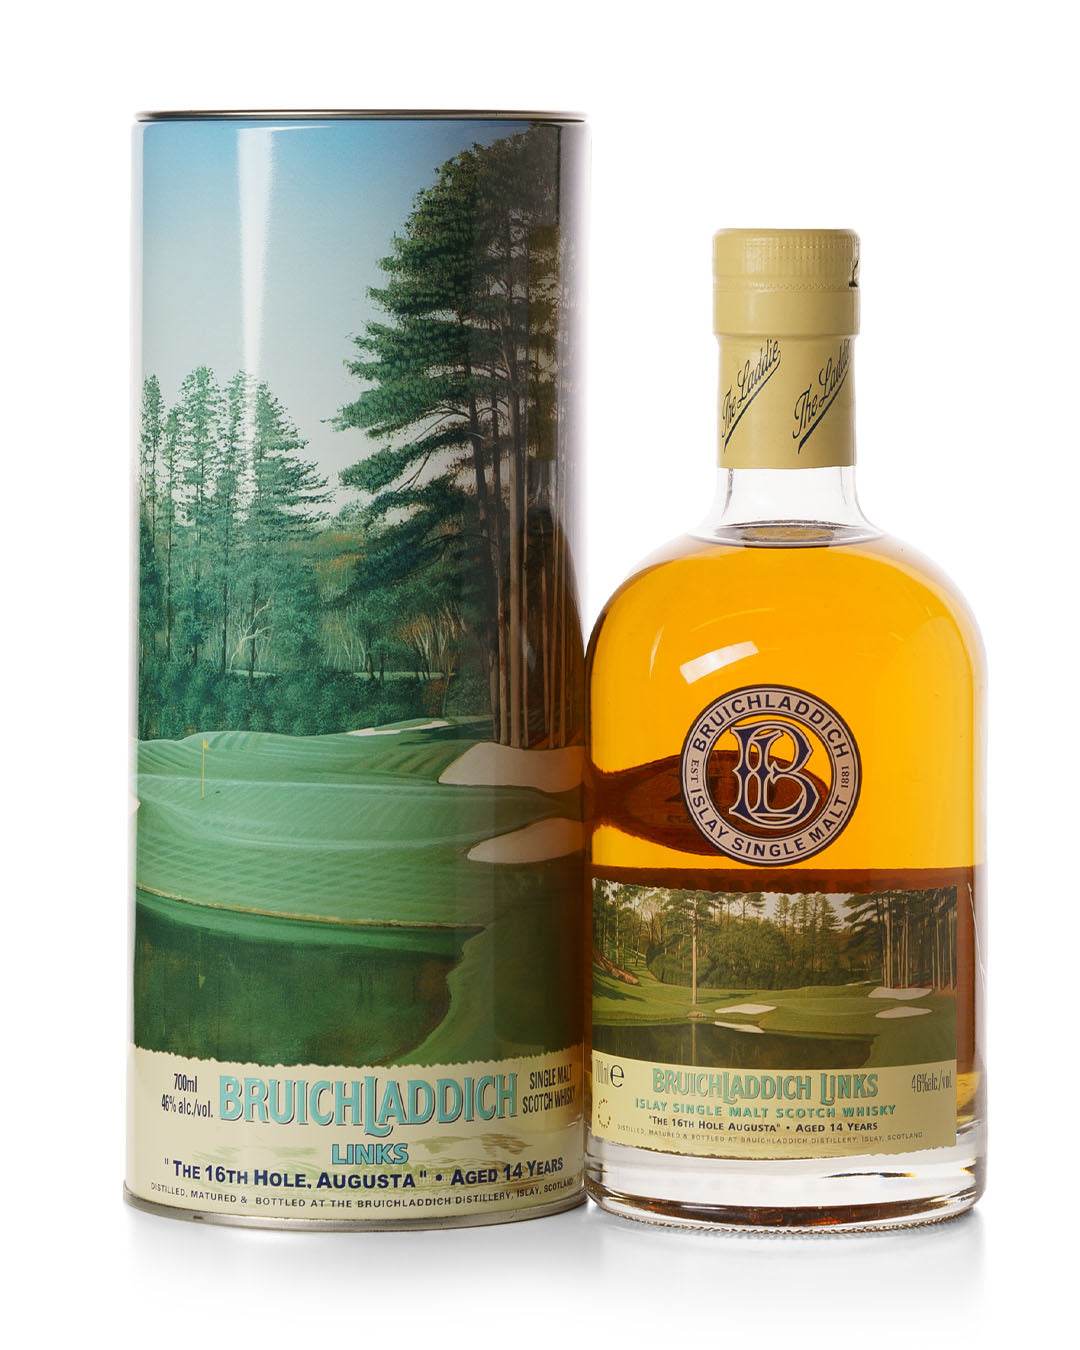 Bruichladdich Links 14 Year Old "The 16th Hole, Augusta" With Original Tin